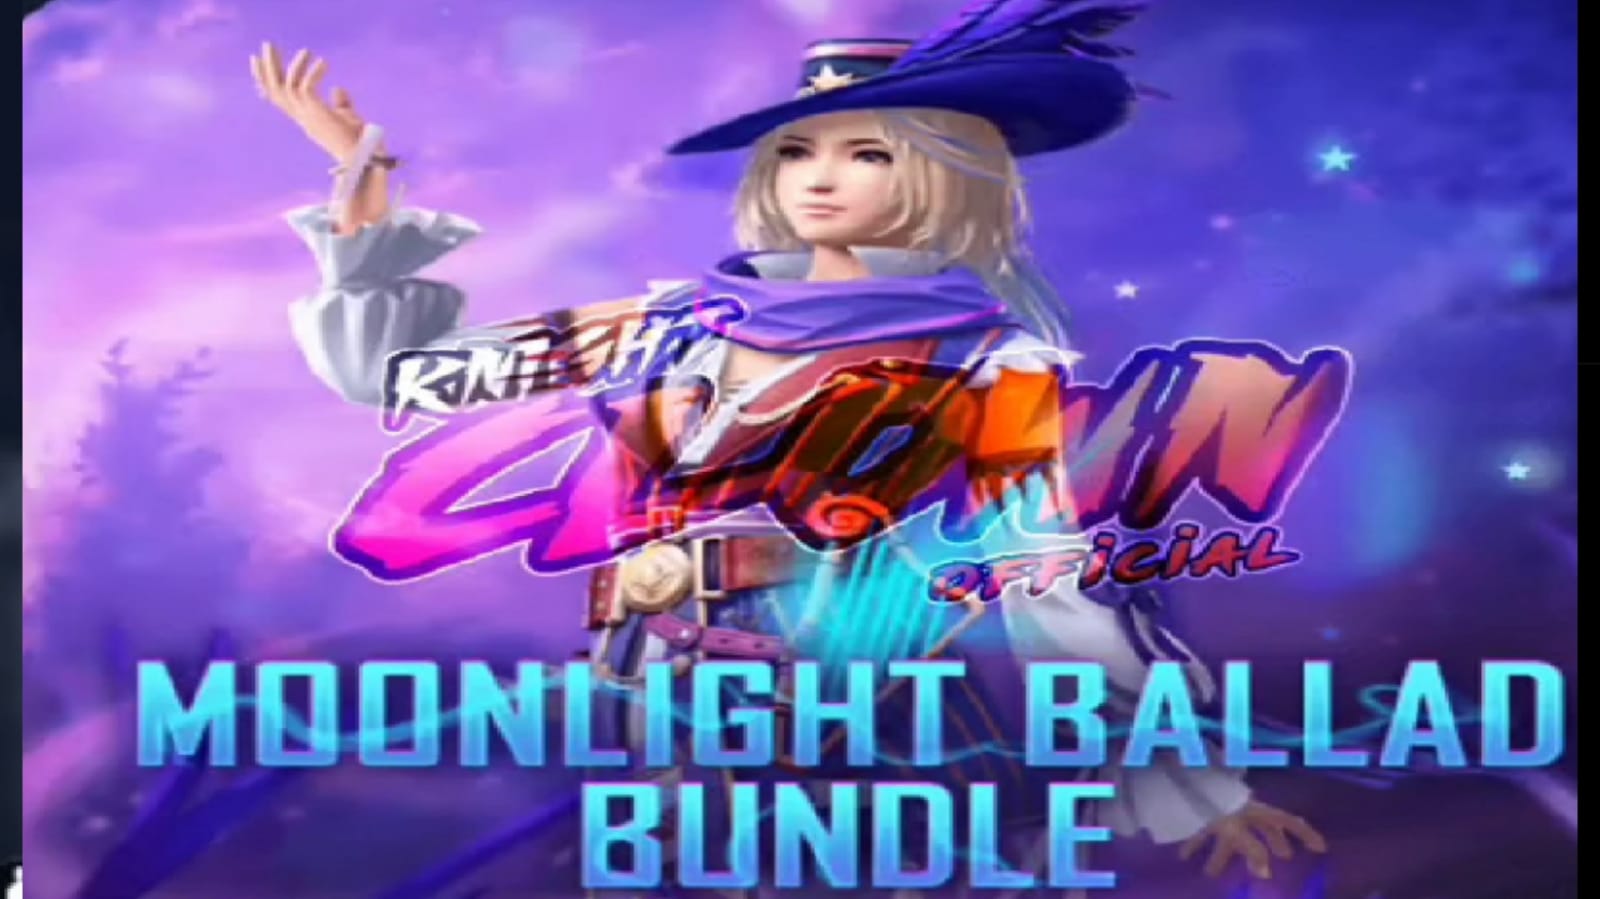 Garena Free Fire Diamond Royale Event: Get Moonlight Ballad Bundle and many items from the Free Fire New Diamond Royale, Check More Details